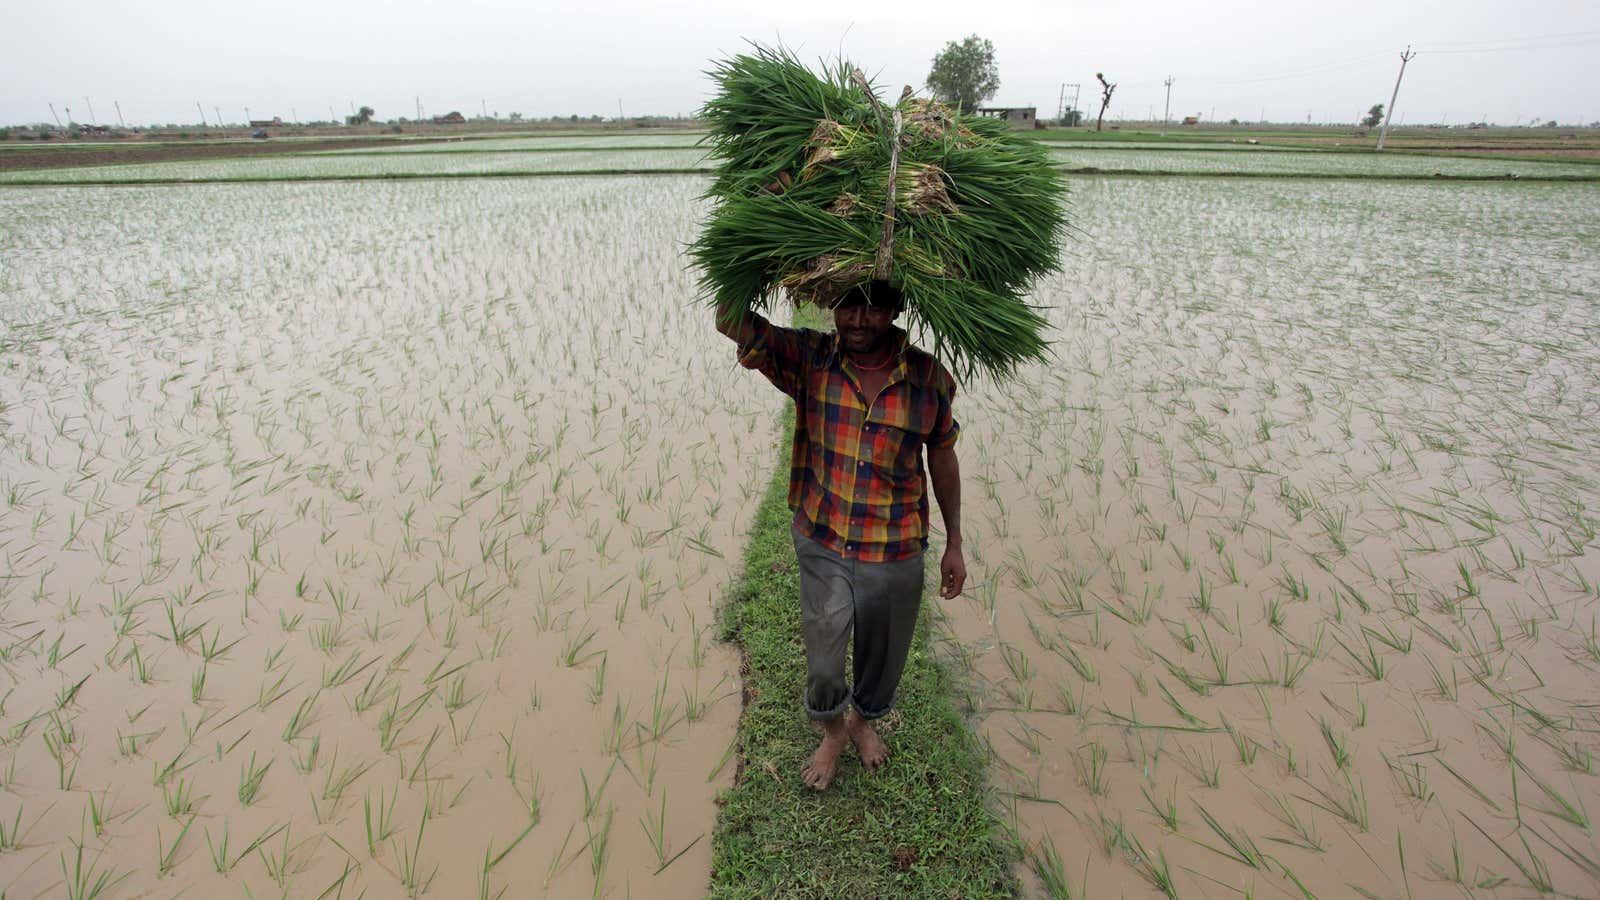 India’s quibble is over restrictions to its massive food security programme.